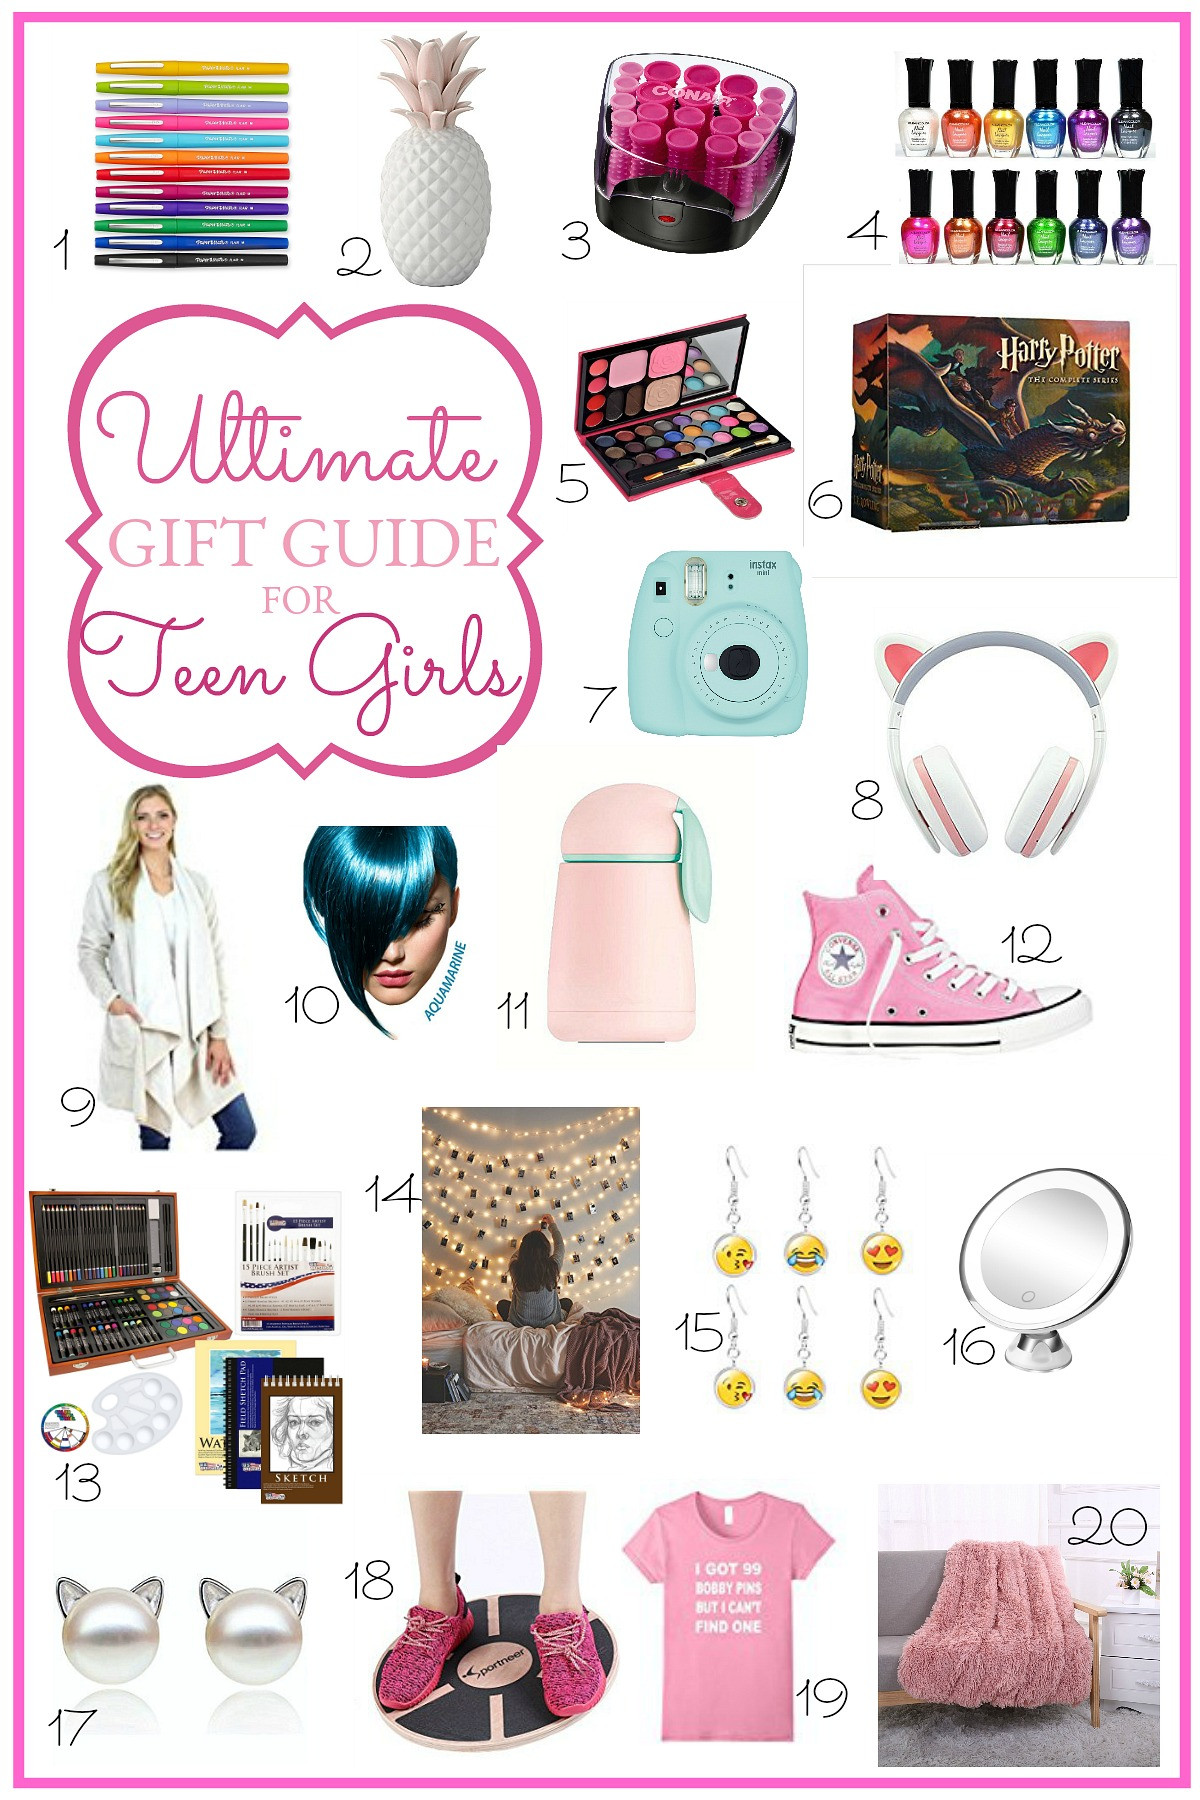 Birthday Gift Ideas For 12 Year Old Girls
 Ultimate Holiday Gift Guide for Teen Girls